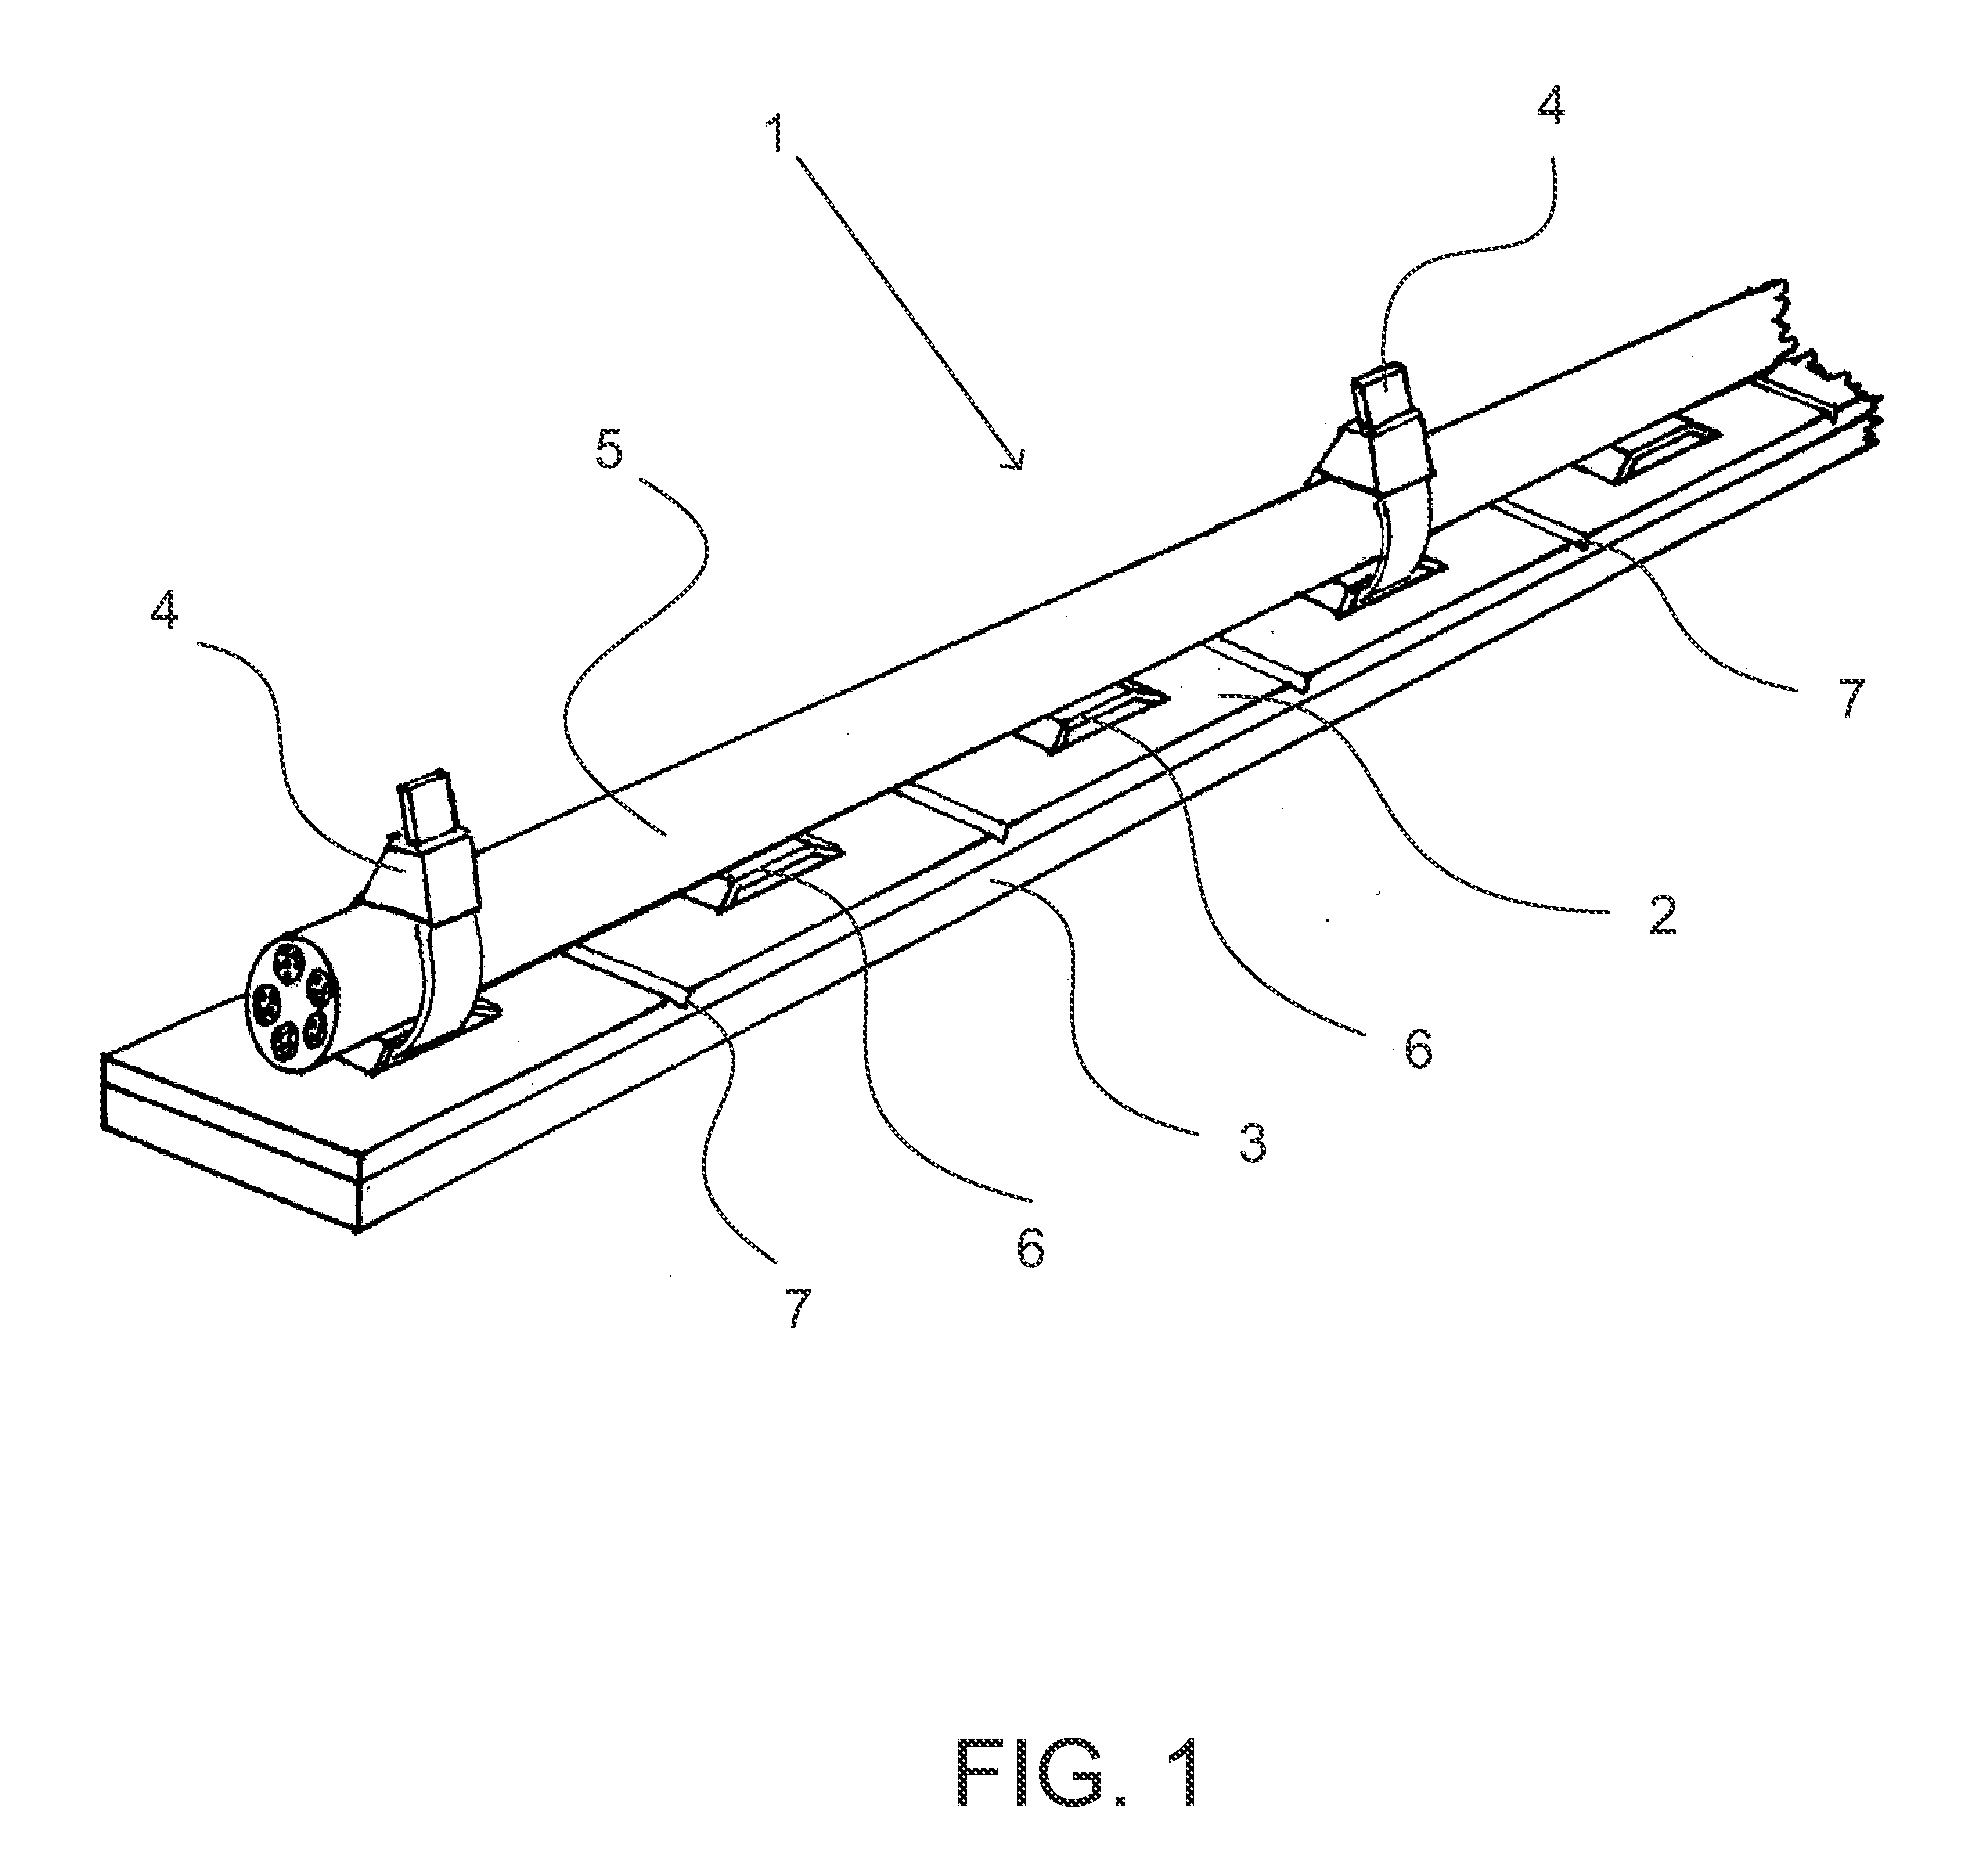 Cable fastening device